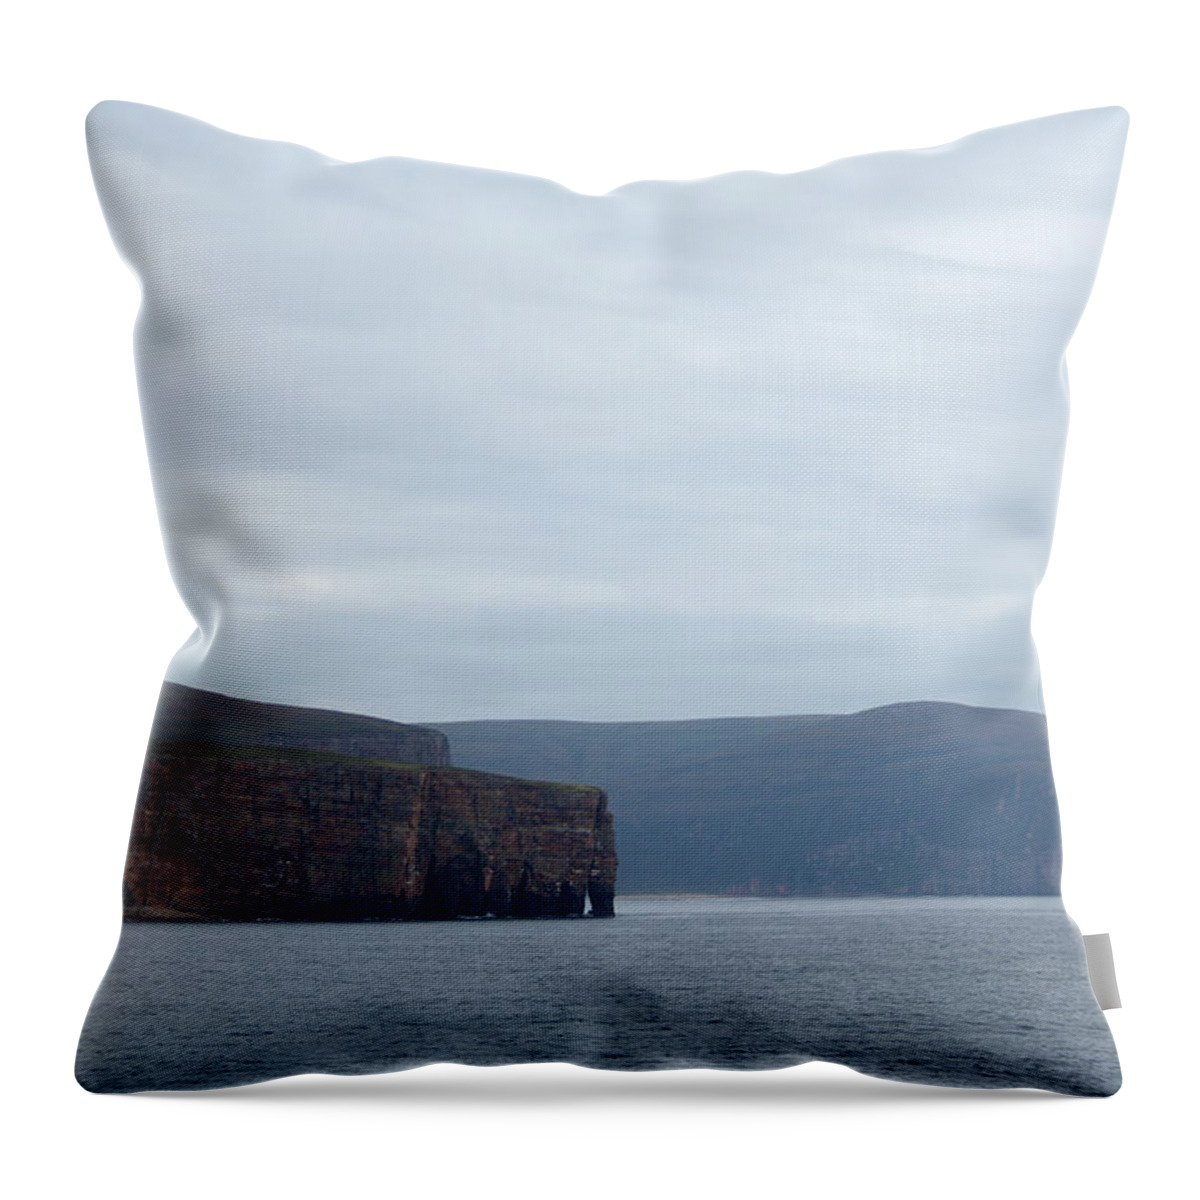 Finger On Lips Throw Pillow featuring the photograph The Island Of Hoy by Hmproudlove